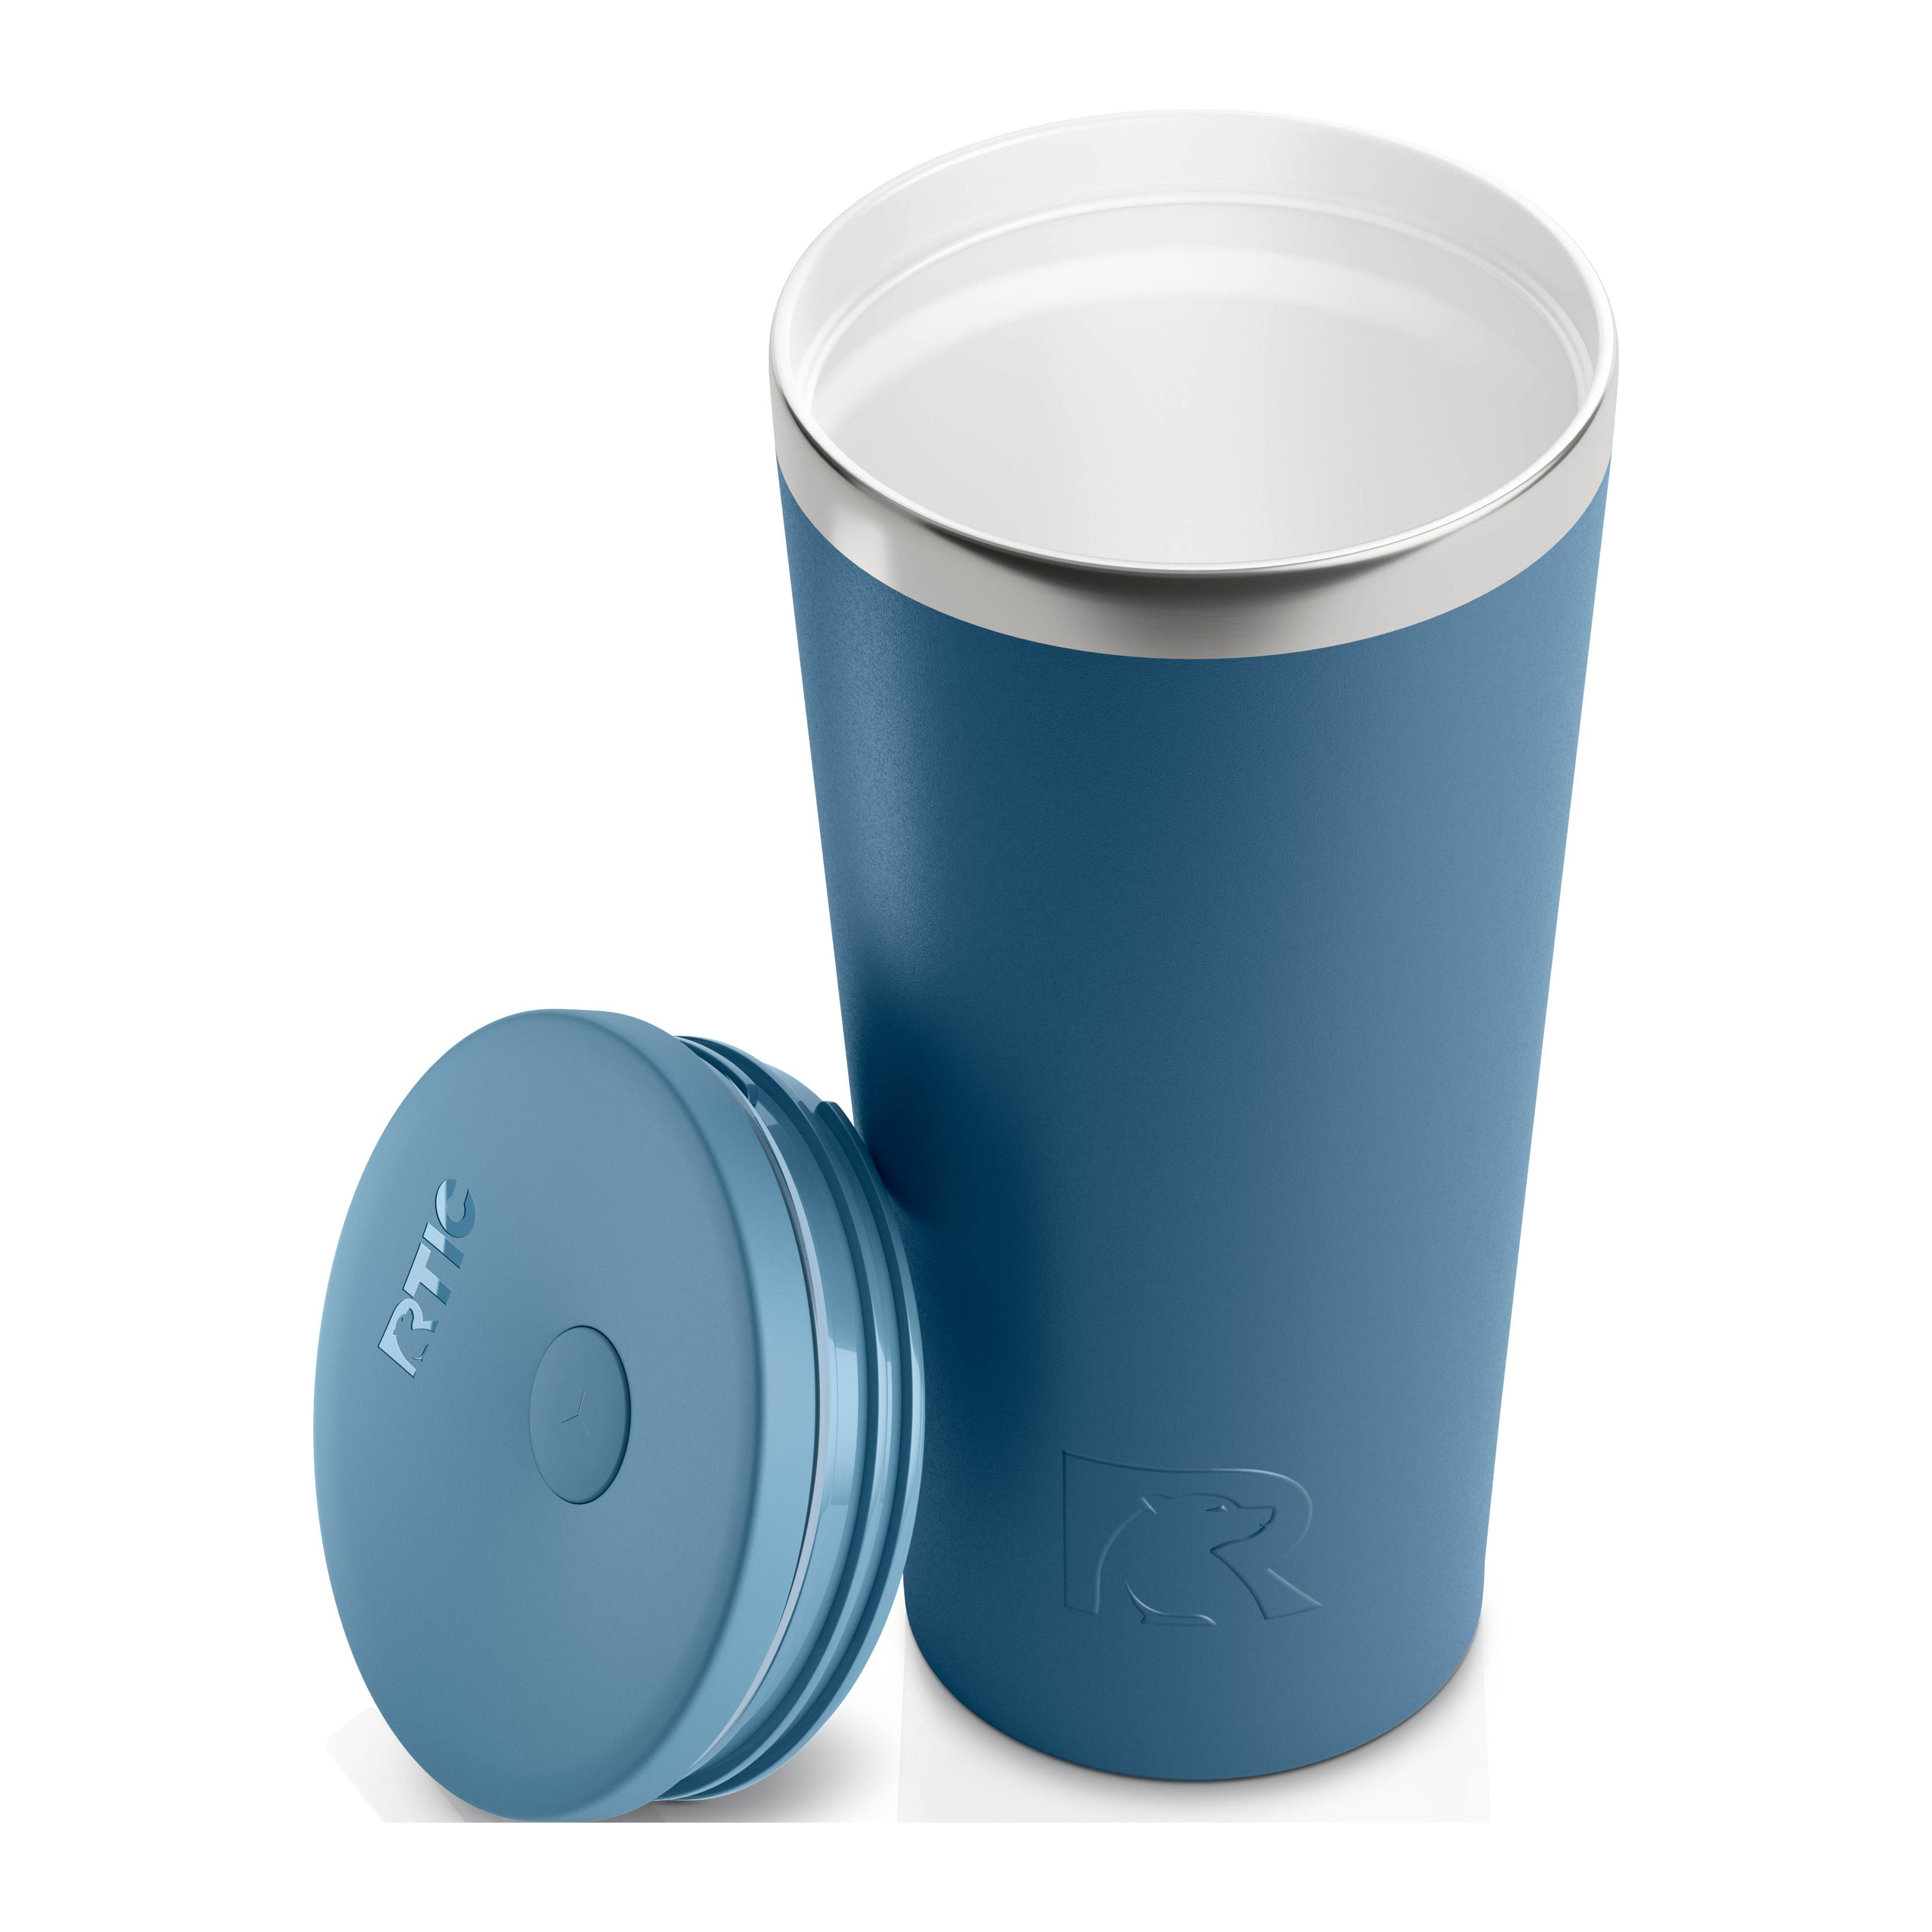 BRP RTIC Drink Cups & Tumbler